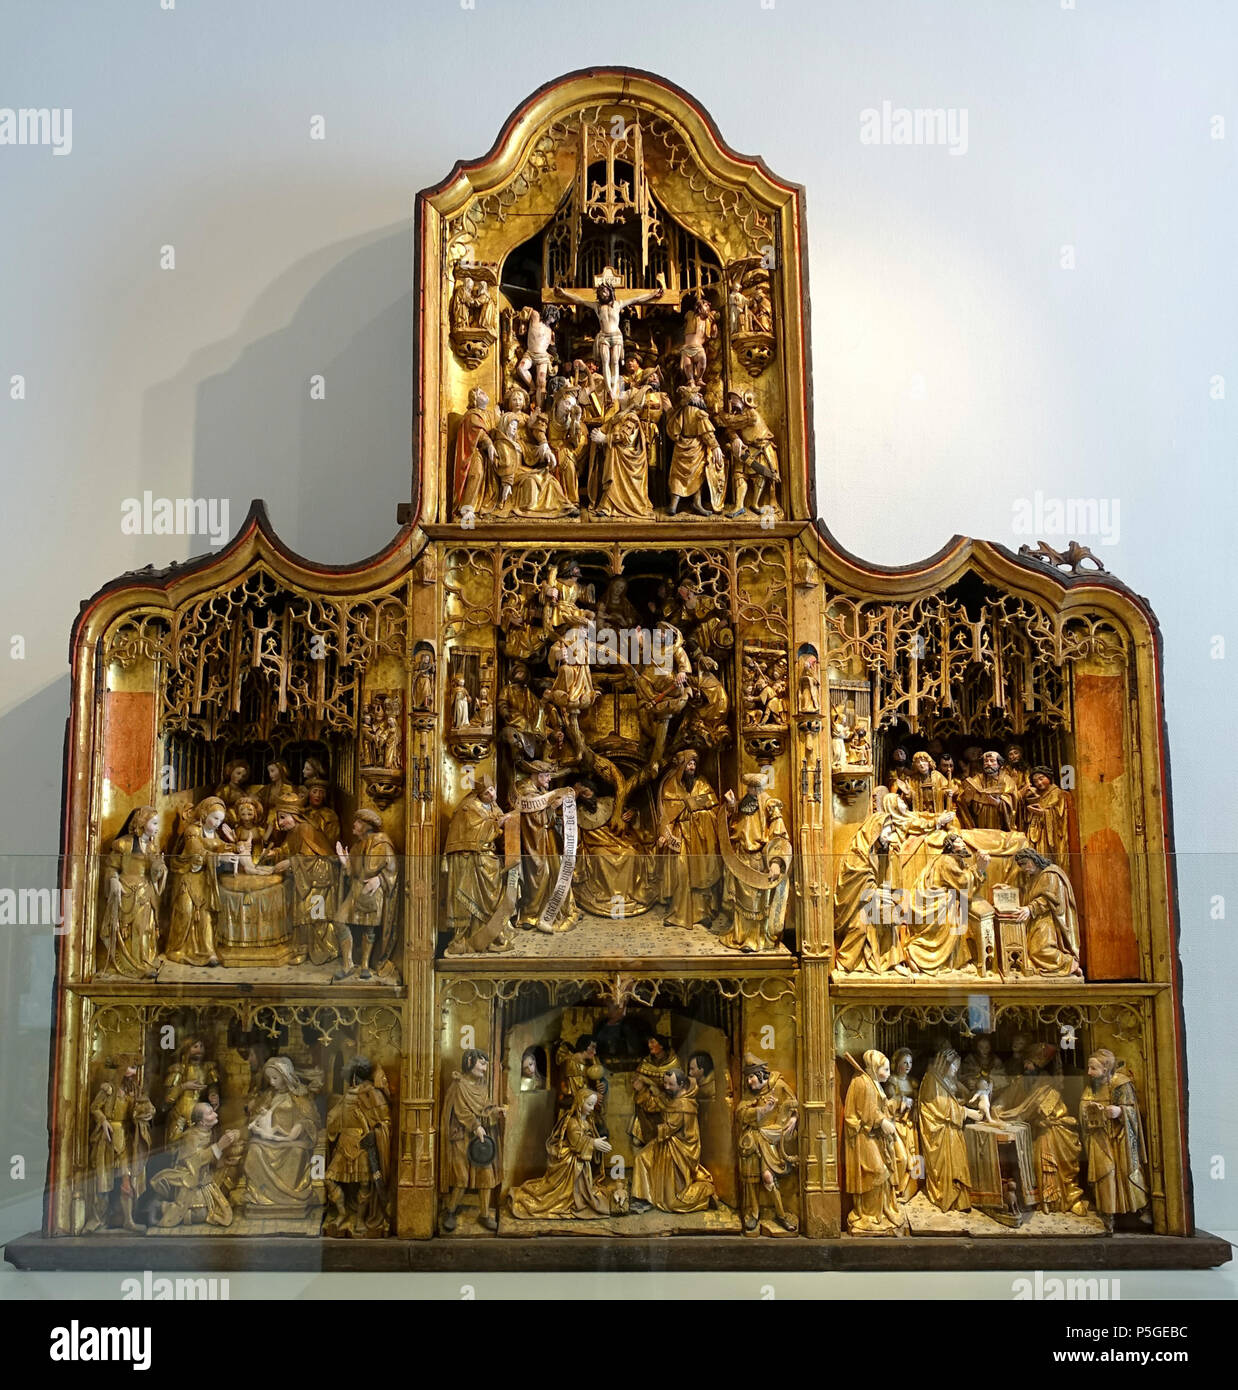 N/A. English: Exhibit in the Cinquantenaire Museum - Brussels, Belgium. 22 April 2016, 07:05:08. Daderot 88 Altar from l'Assomption Notre-Dame church at Pailhe, Anvers, c. 1510-1530, oak, polychrome - Cinquantenaire Museum - Brussels, Belgium - DSC08638 Stock Photo